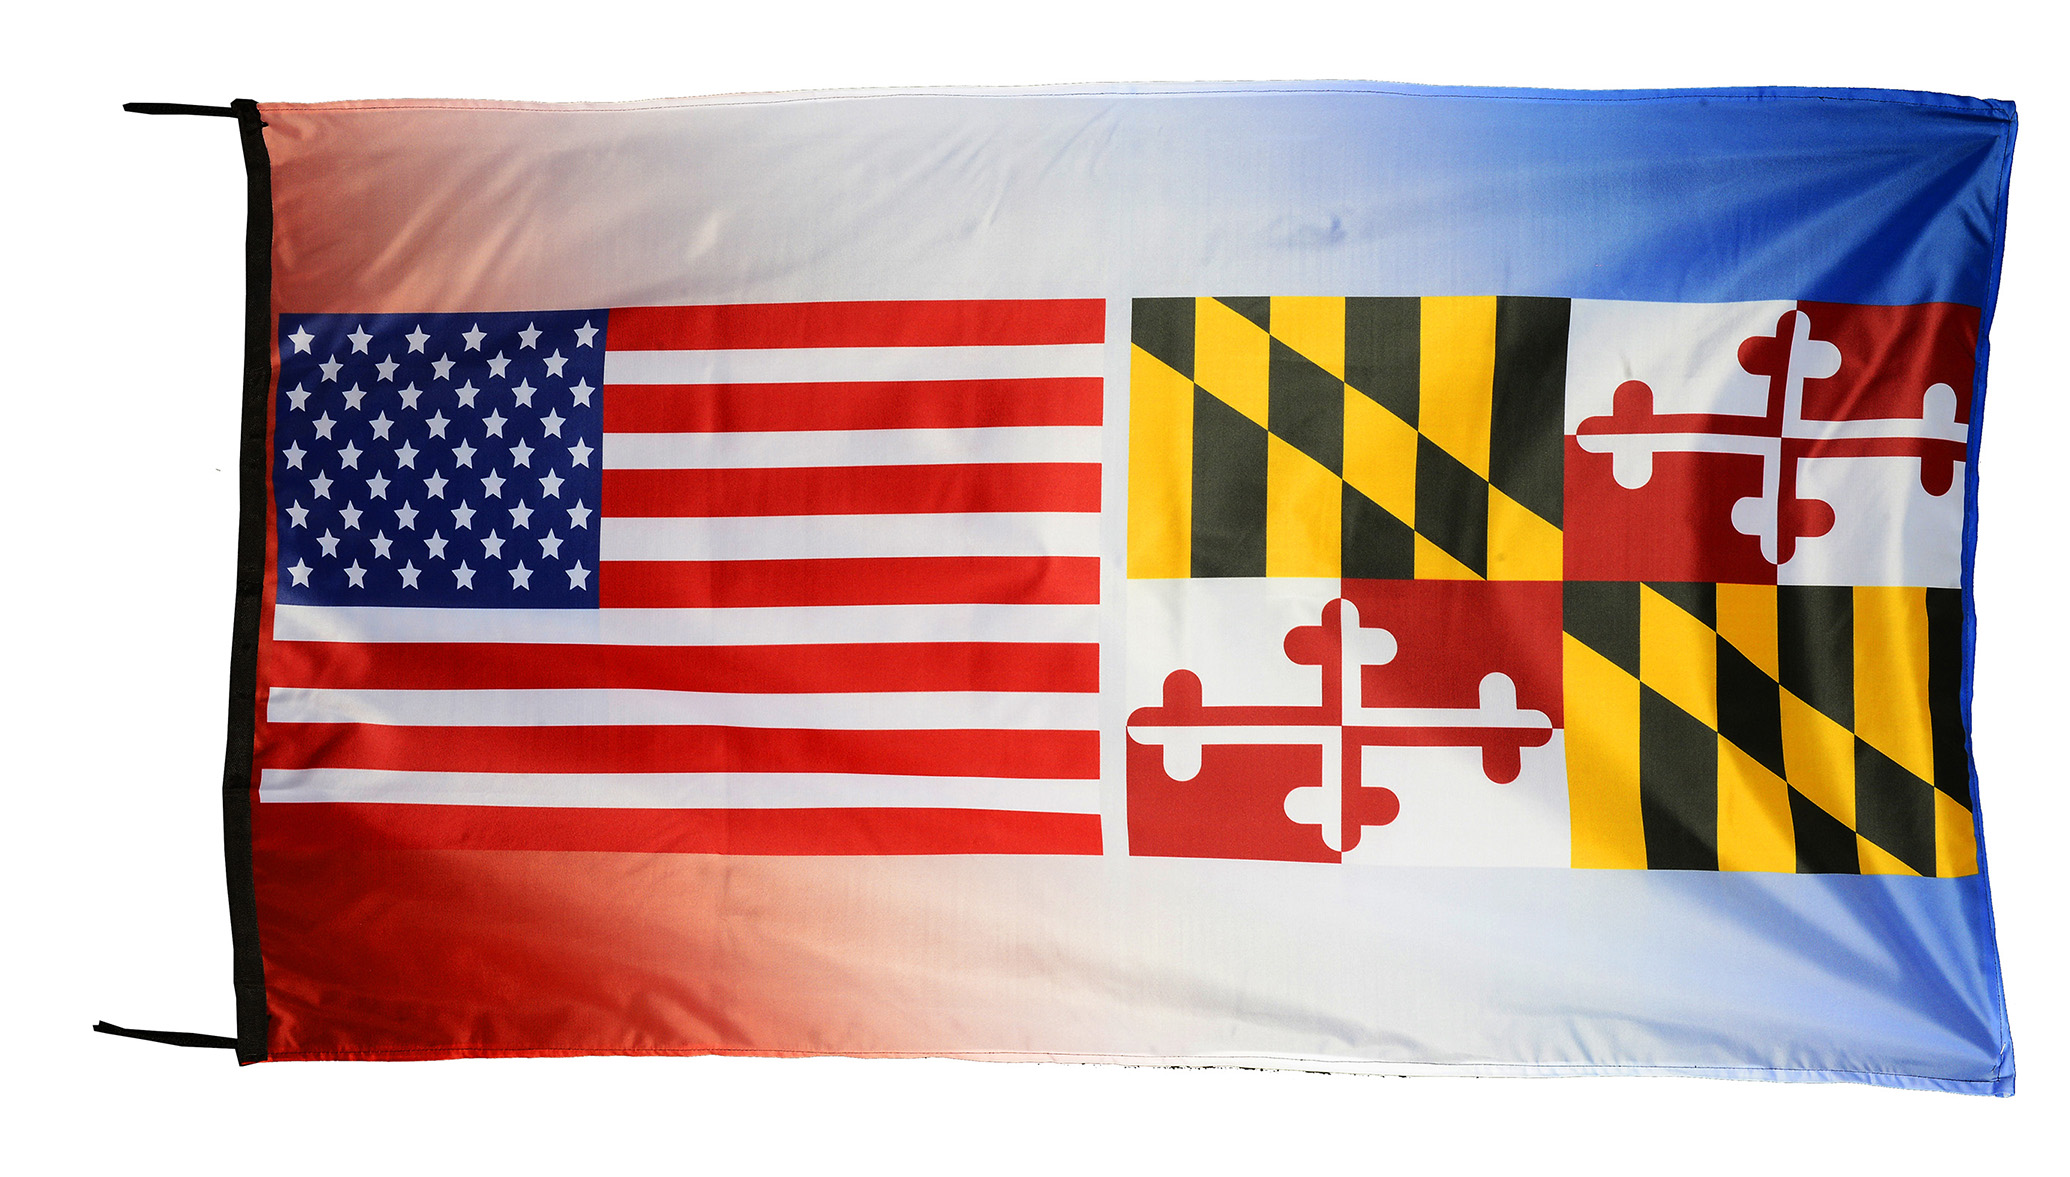 Flag  098 USA / US Country / United States Of America and Tennessee State / Patriotic / Pride Hybrid Weather-Resistant Polyester Outdoor Flag Landscape Banner / Vivid Colors / 3 X 5 FT (150 x 90cm) International Flags for Sale